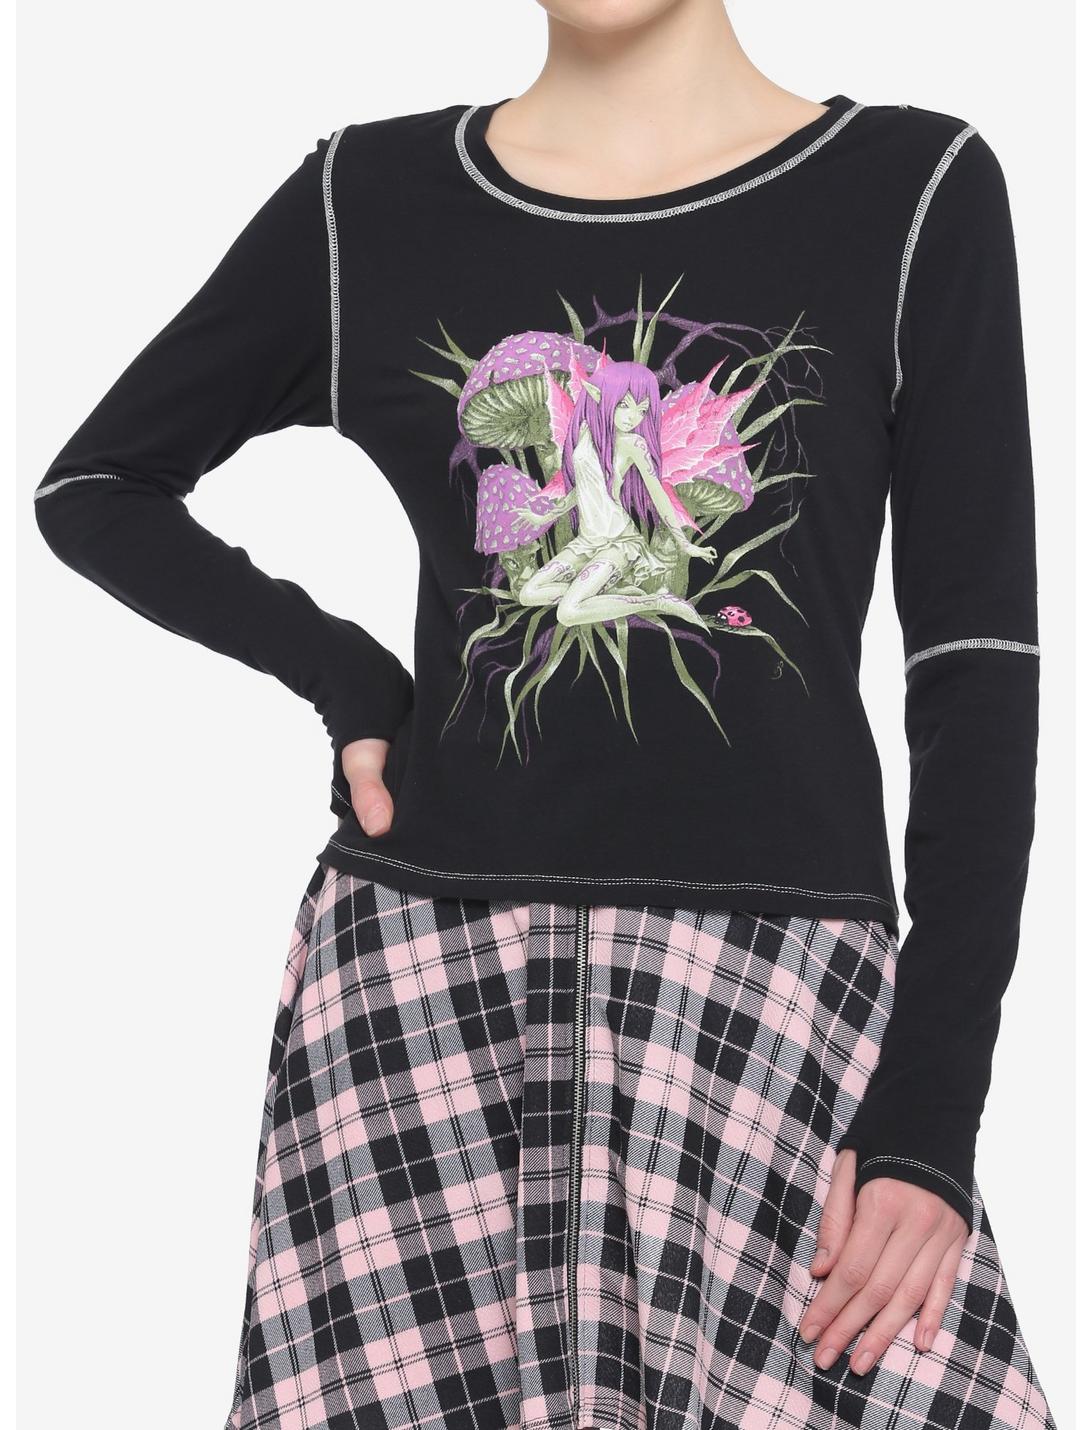 Fairies By Trick Lace-Up Girls Long-Sleeve T-Shirt, MULTI, hi-res